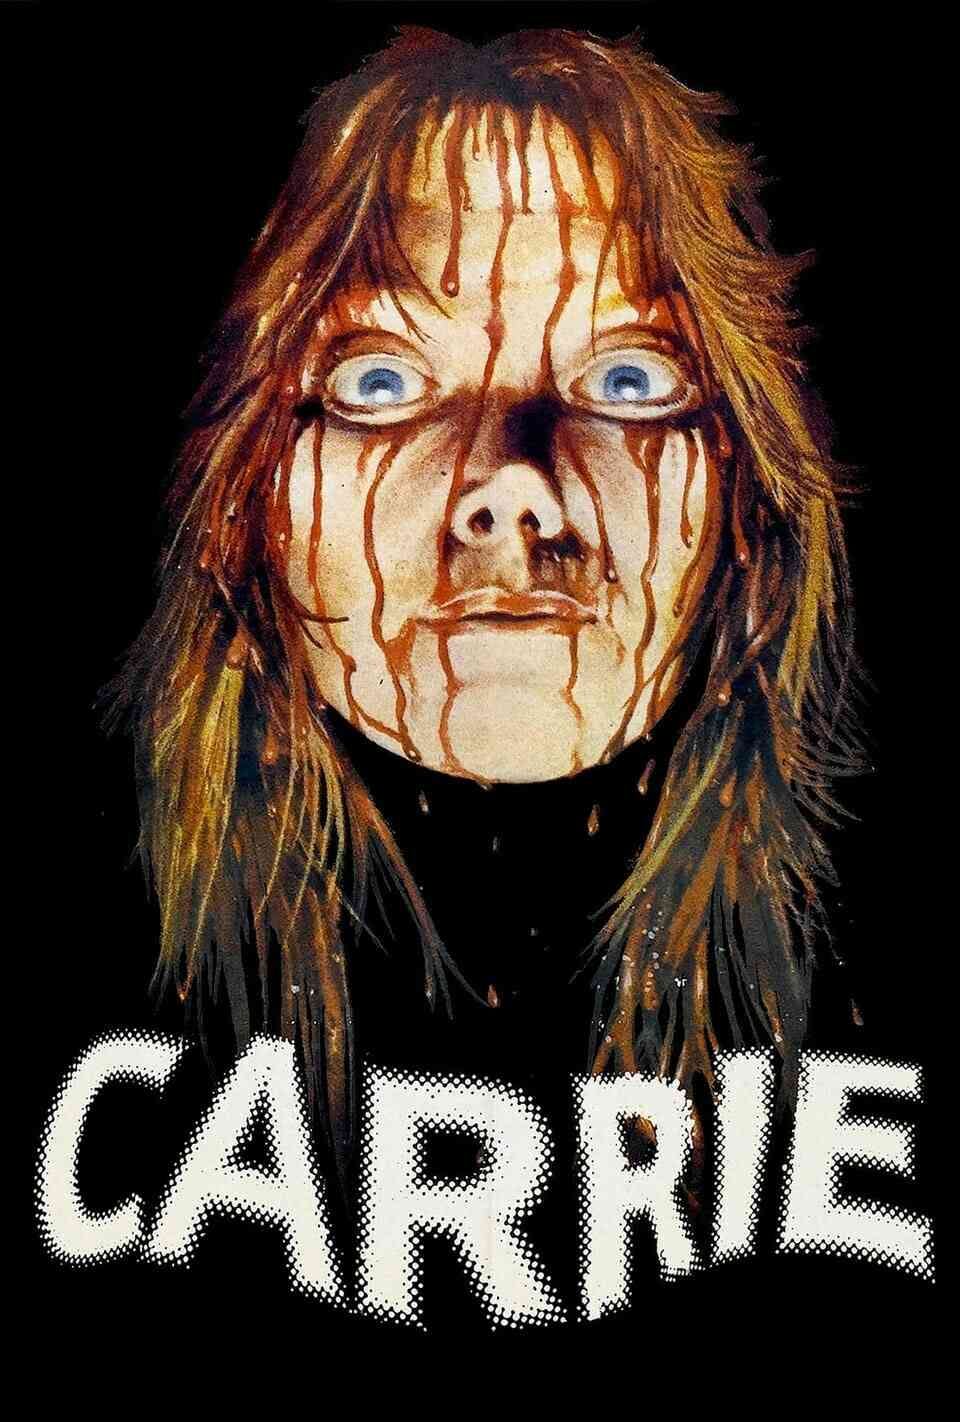 Read Carrie screenplay (poster)